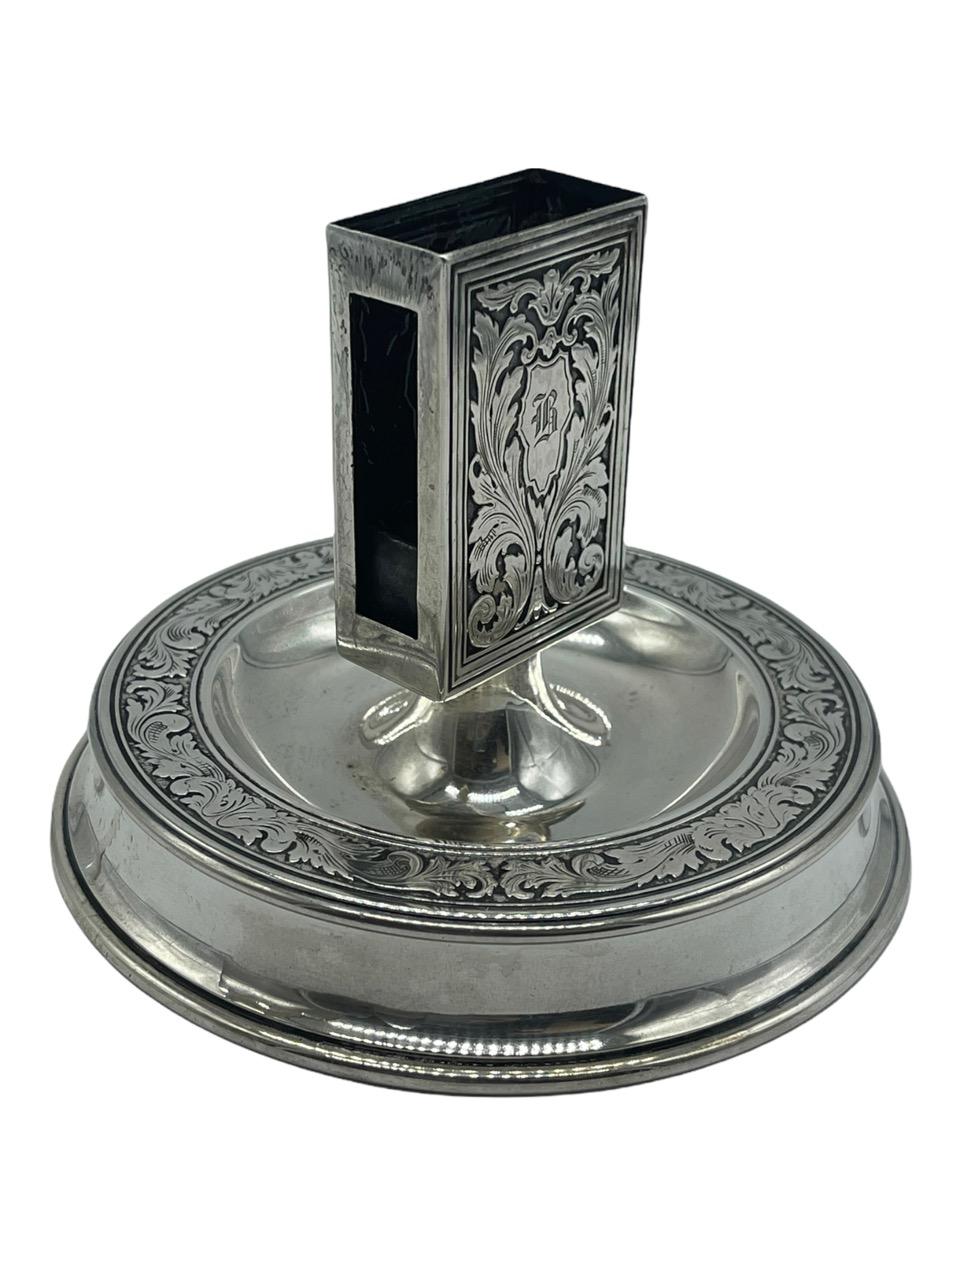 19th Century Sterling Silver Match Box Holder and Ashtray Stand by Tiffany & Co In Fair Condition For Sale In North Miami, FL